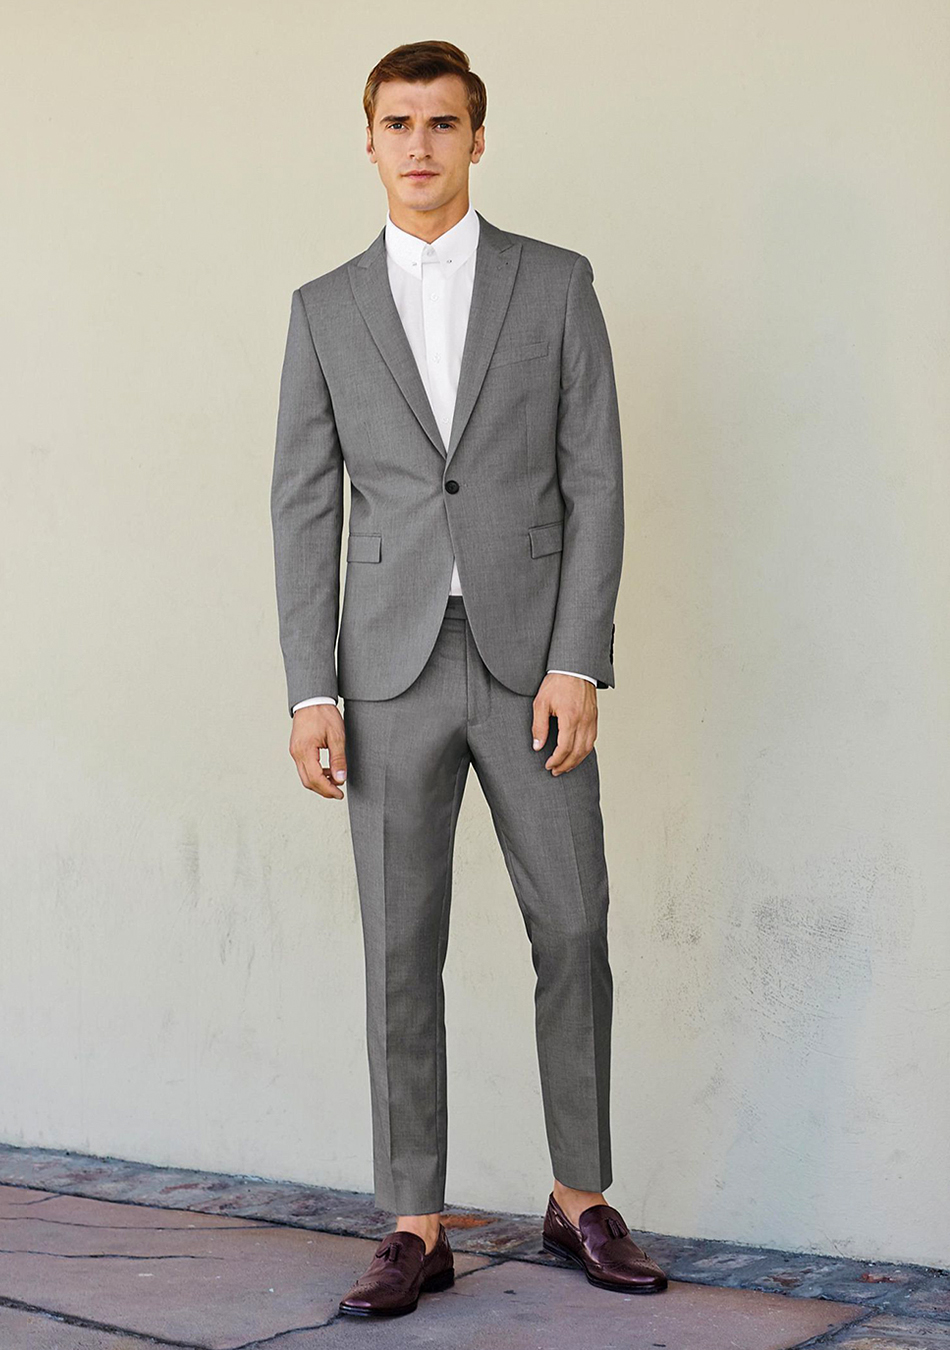 Grey suit, white dress shirt, and oxblood loafers